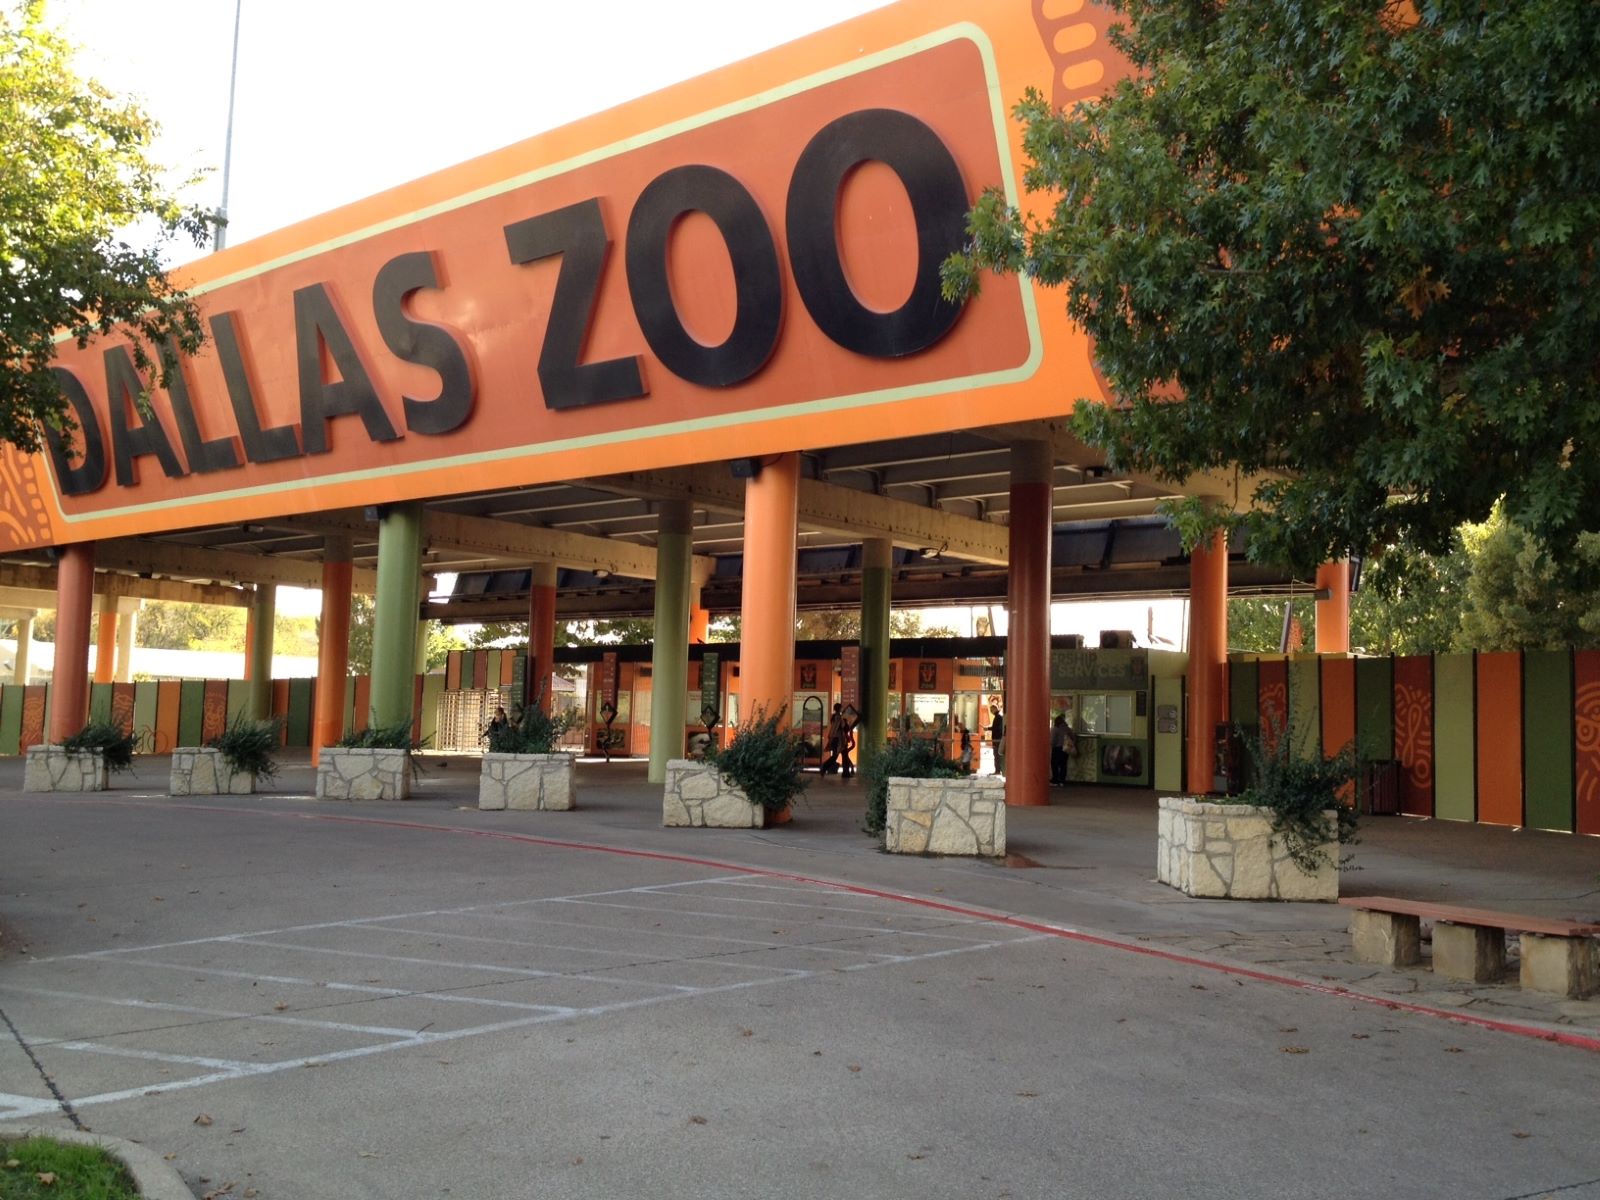 8-astonishing-facts-about-dallas-zoo